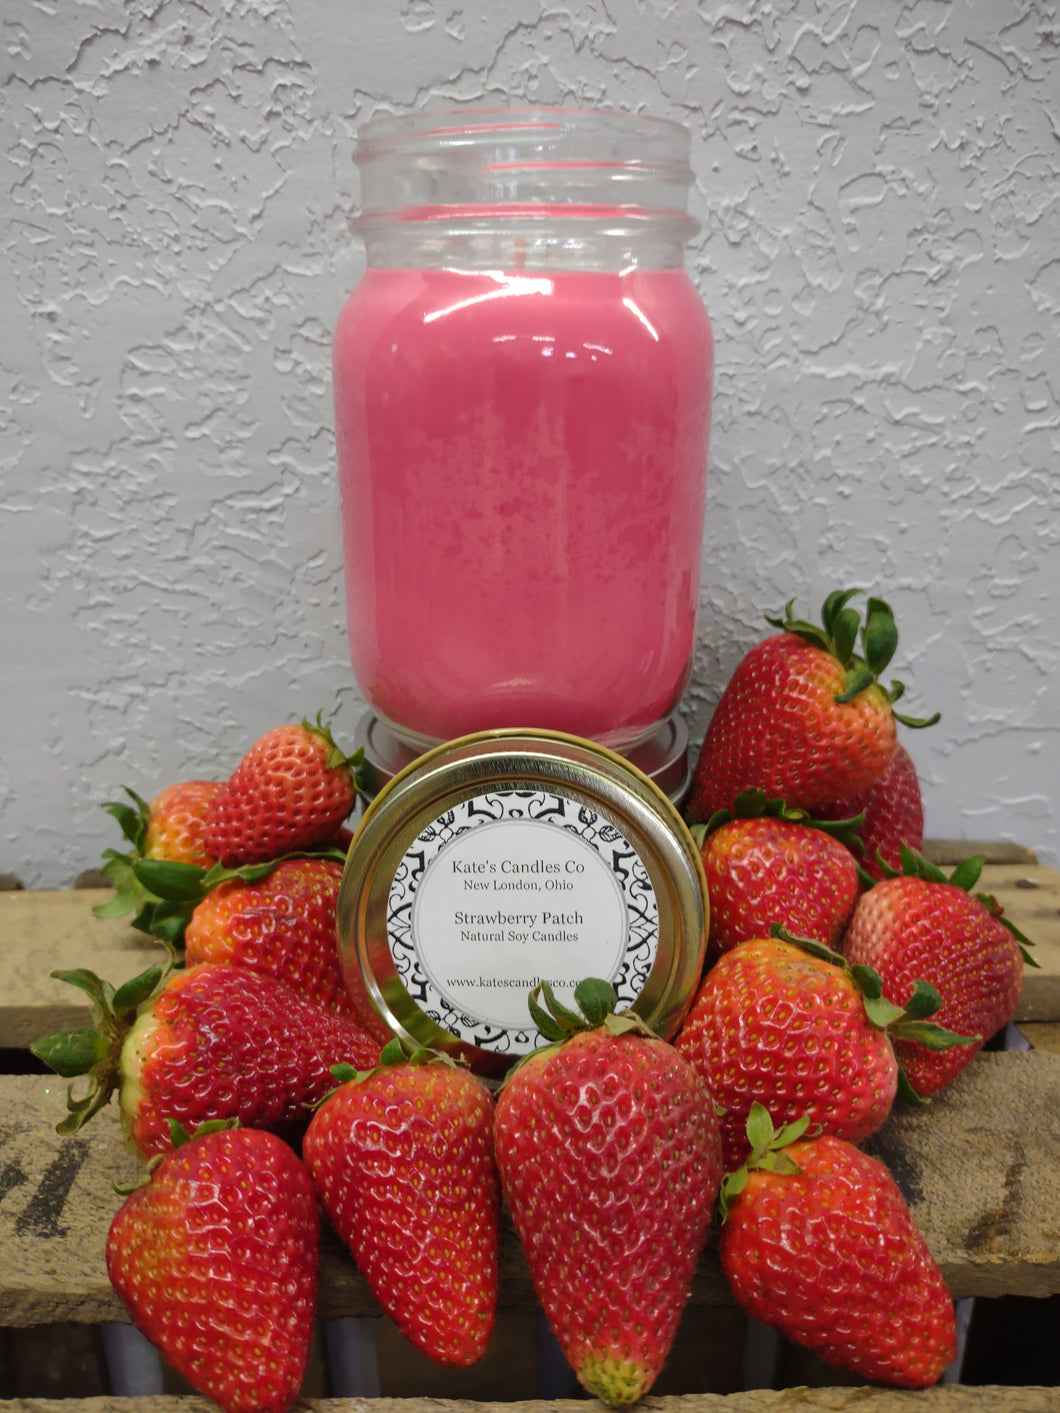 Strawberry Patch Soy Candles - Kate's Candles Co.